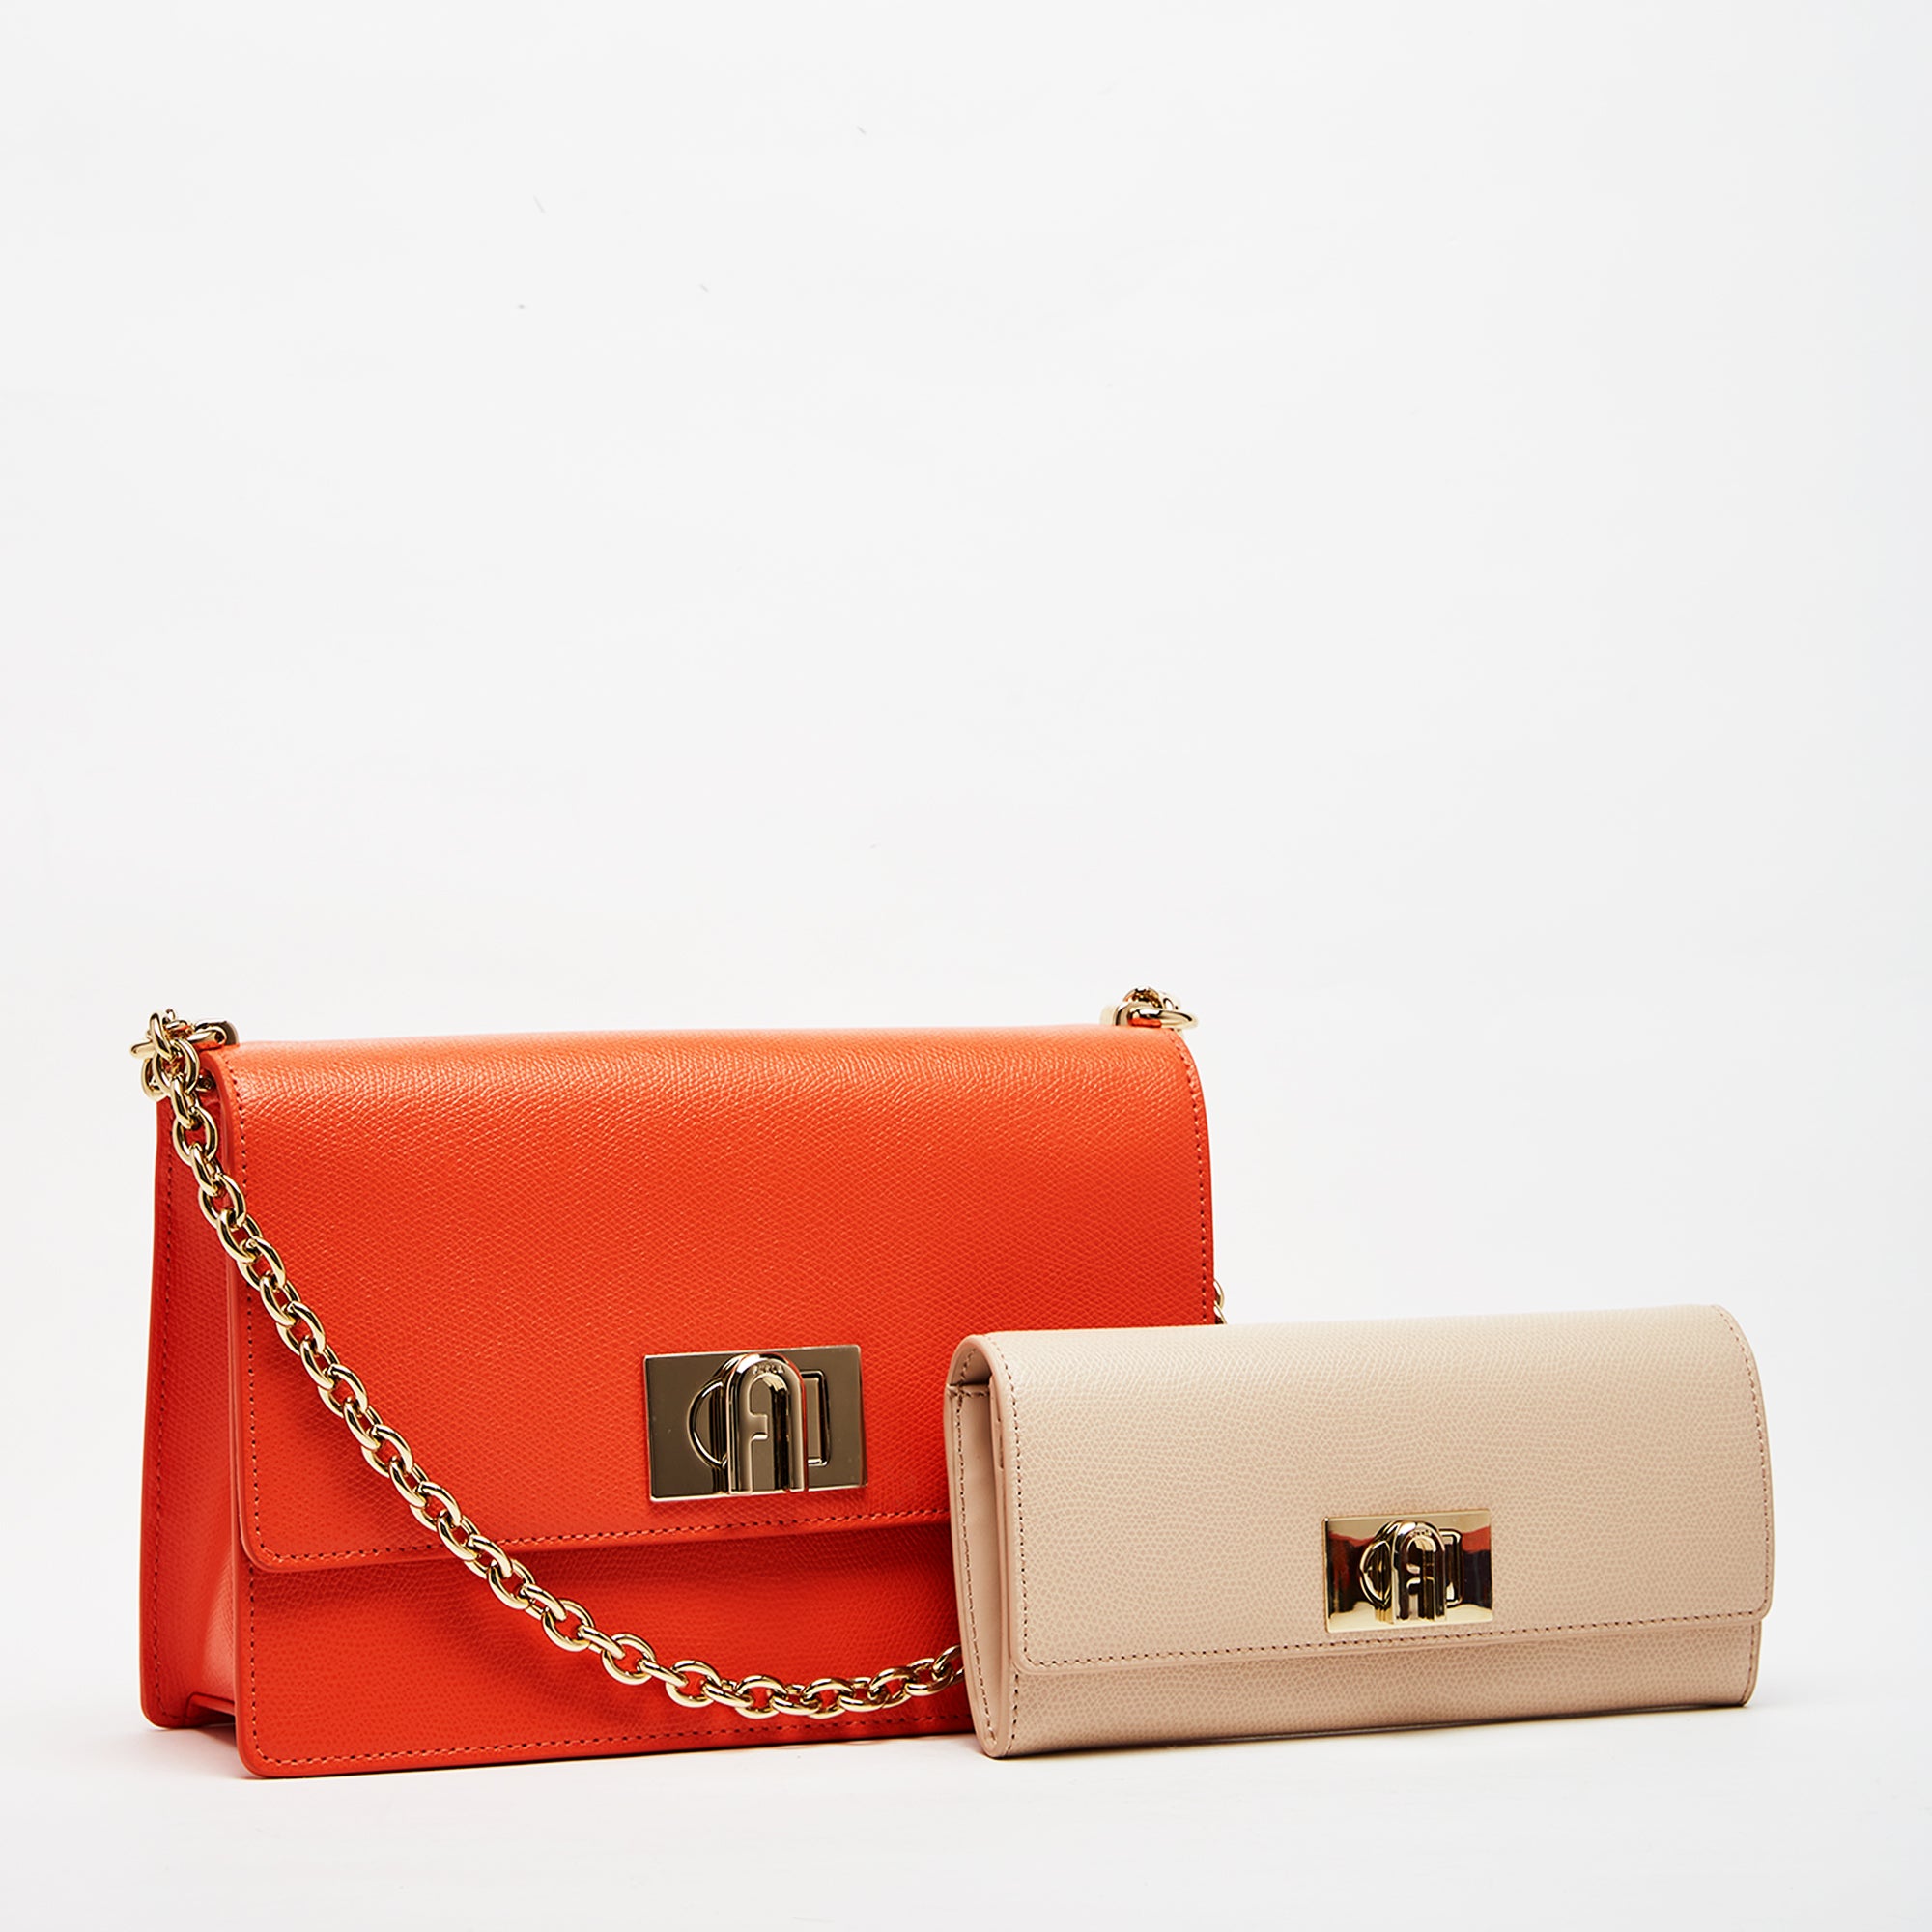 Furla 1927 Crossbody Bag with Continental Wallet Combo Clivia Ballerina S One Size